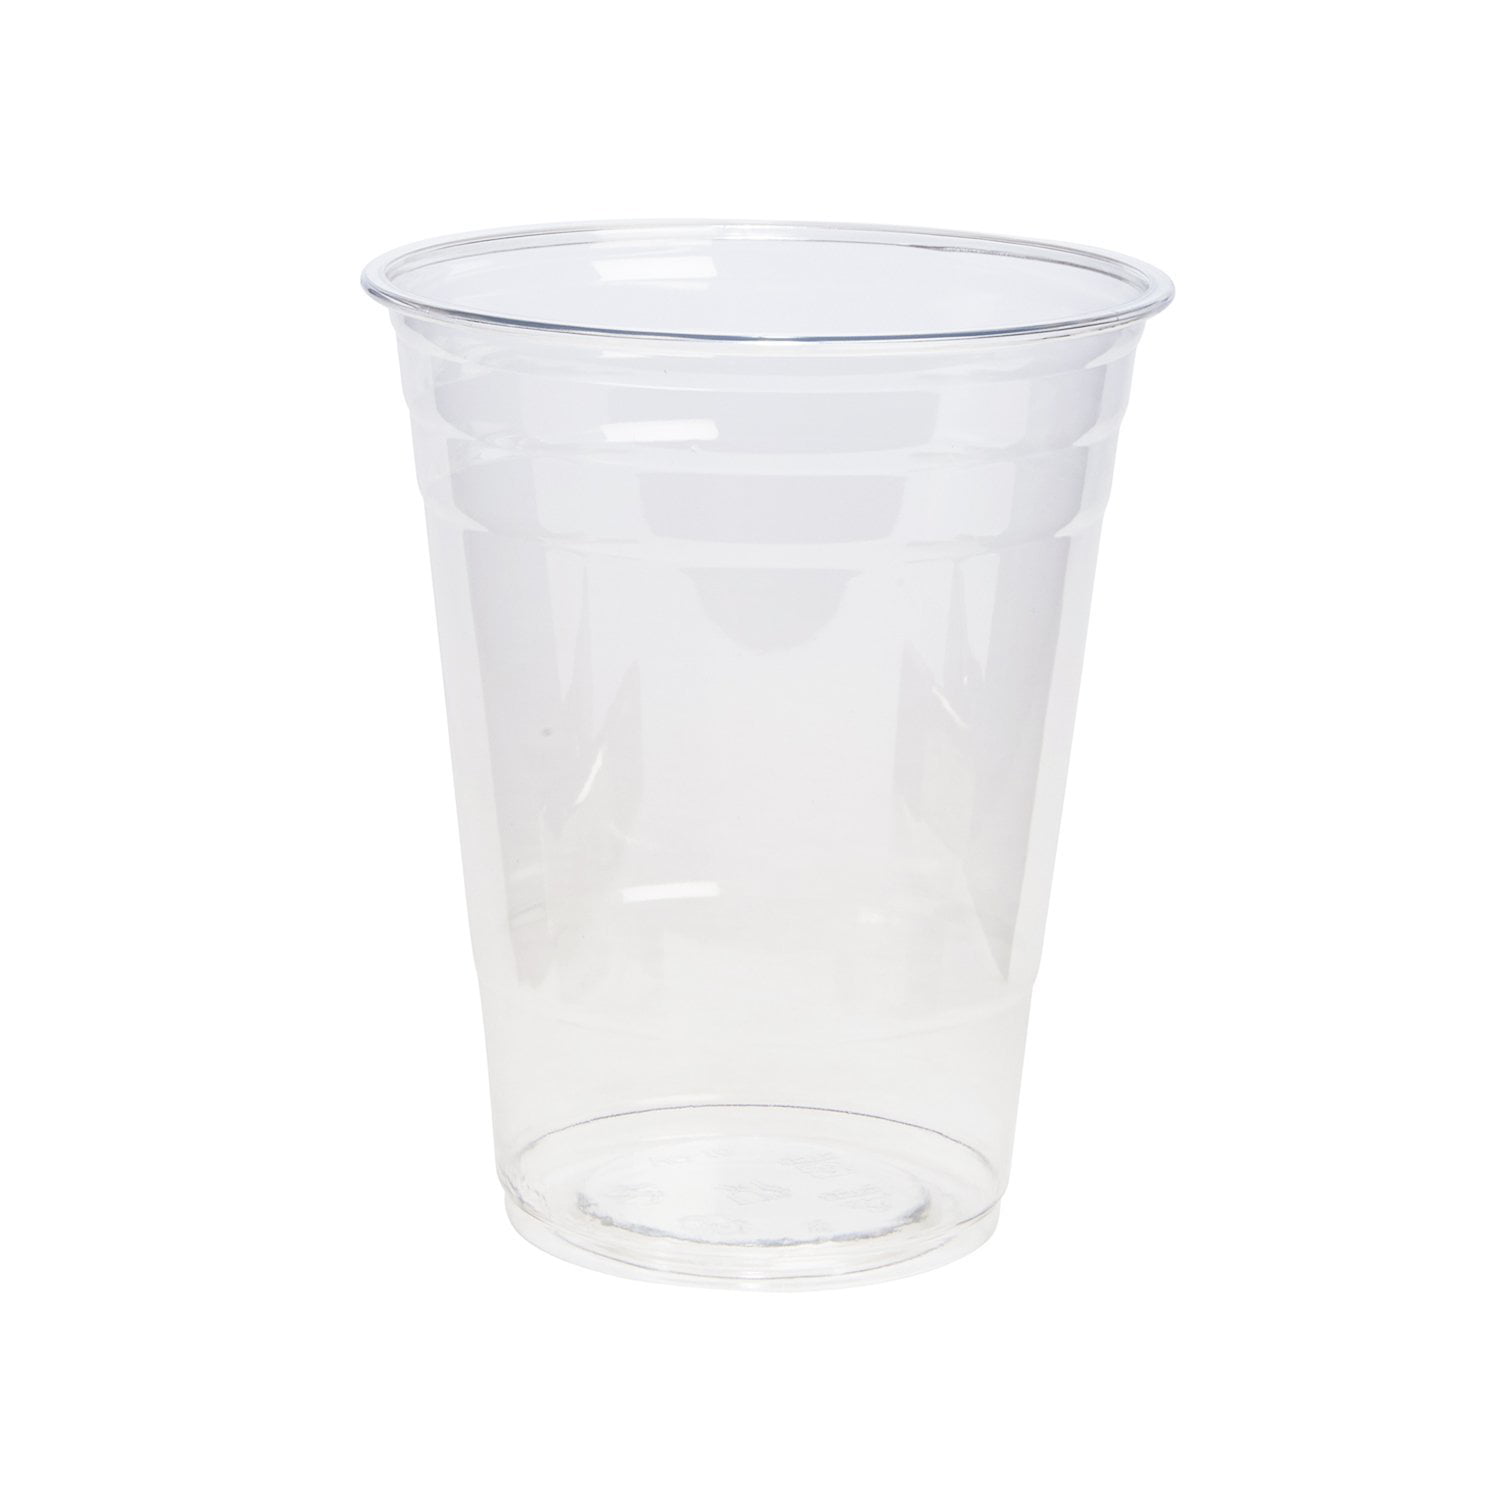  Netko Plastic Cups with Dome Lids 50 Sets Of 16 OZ Cups with  Lids: Home & Kitchen